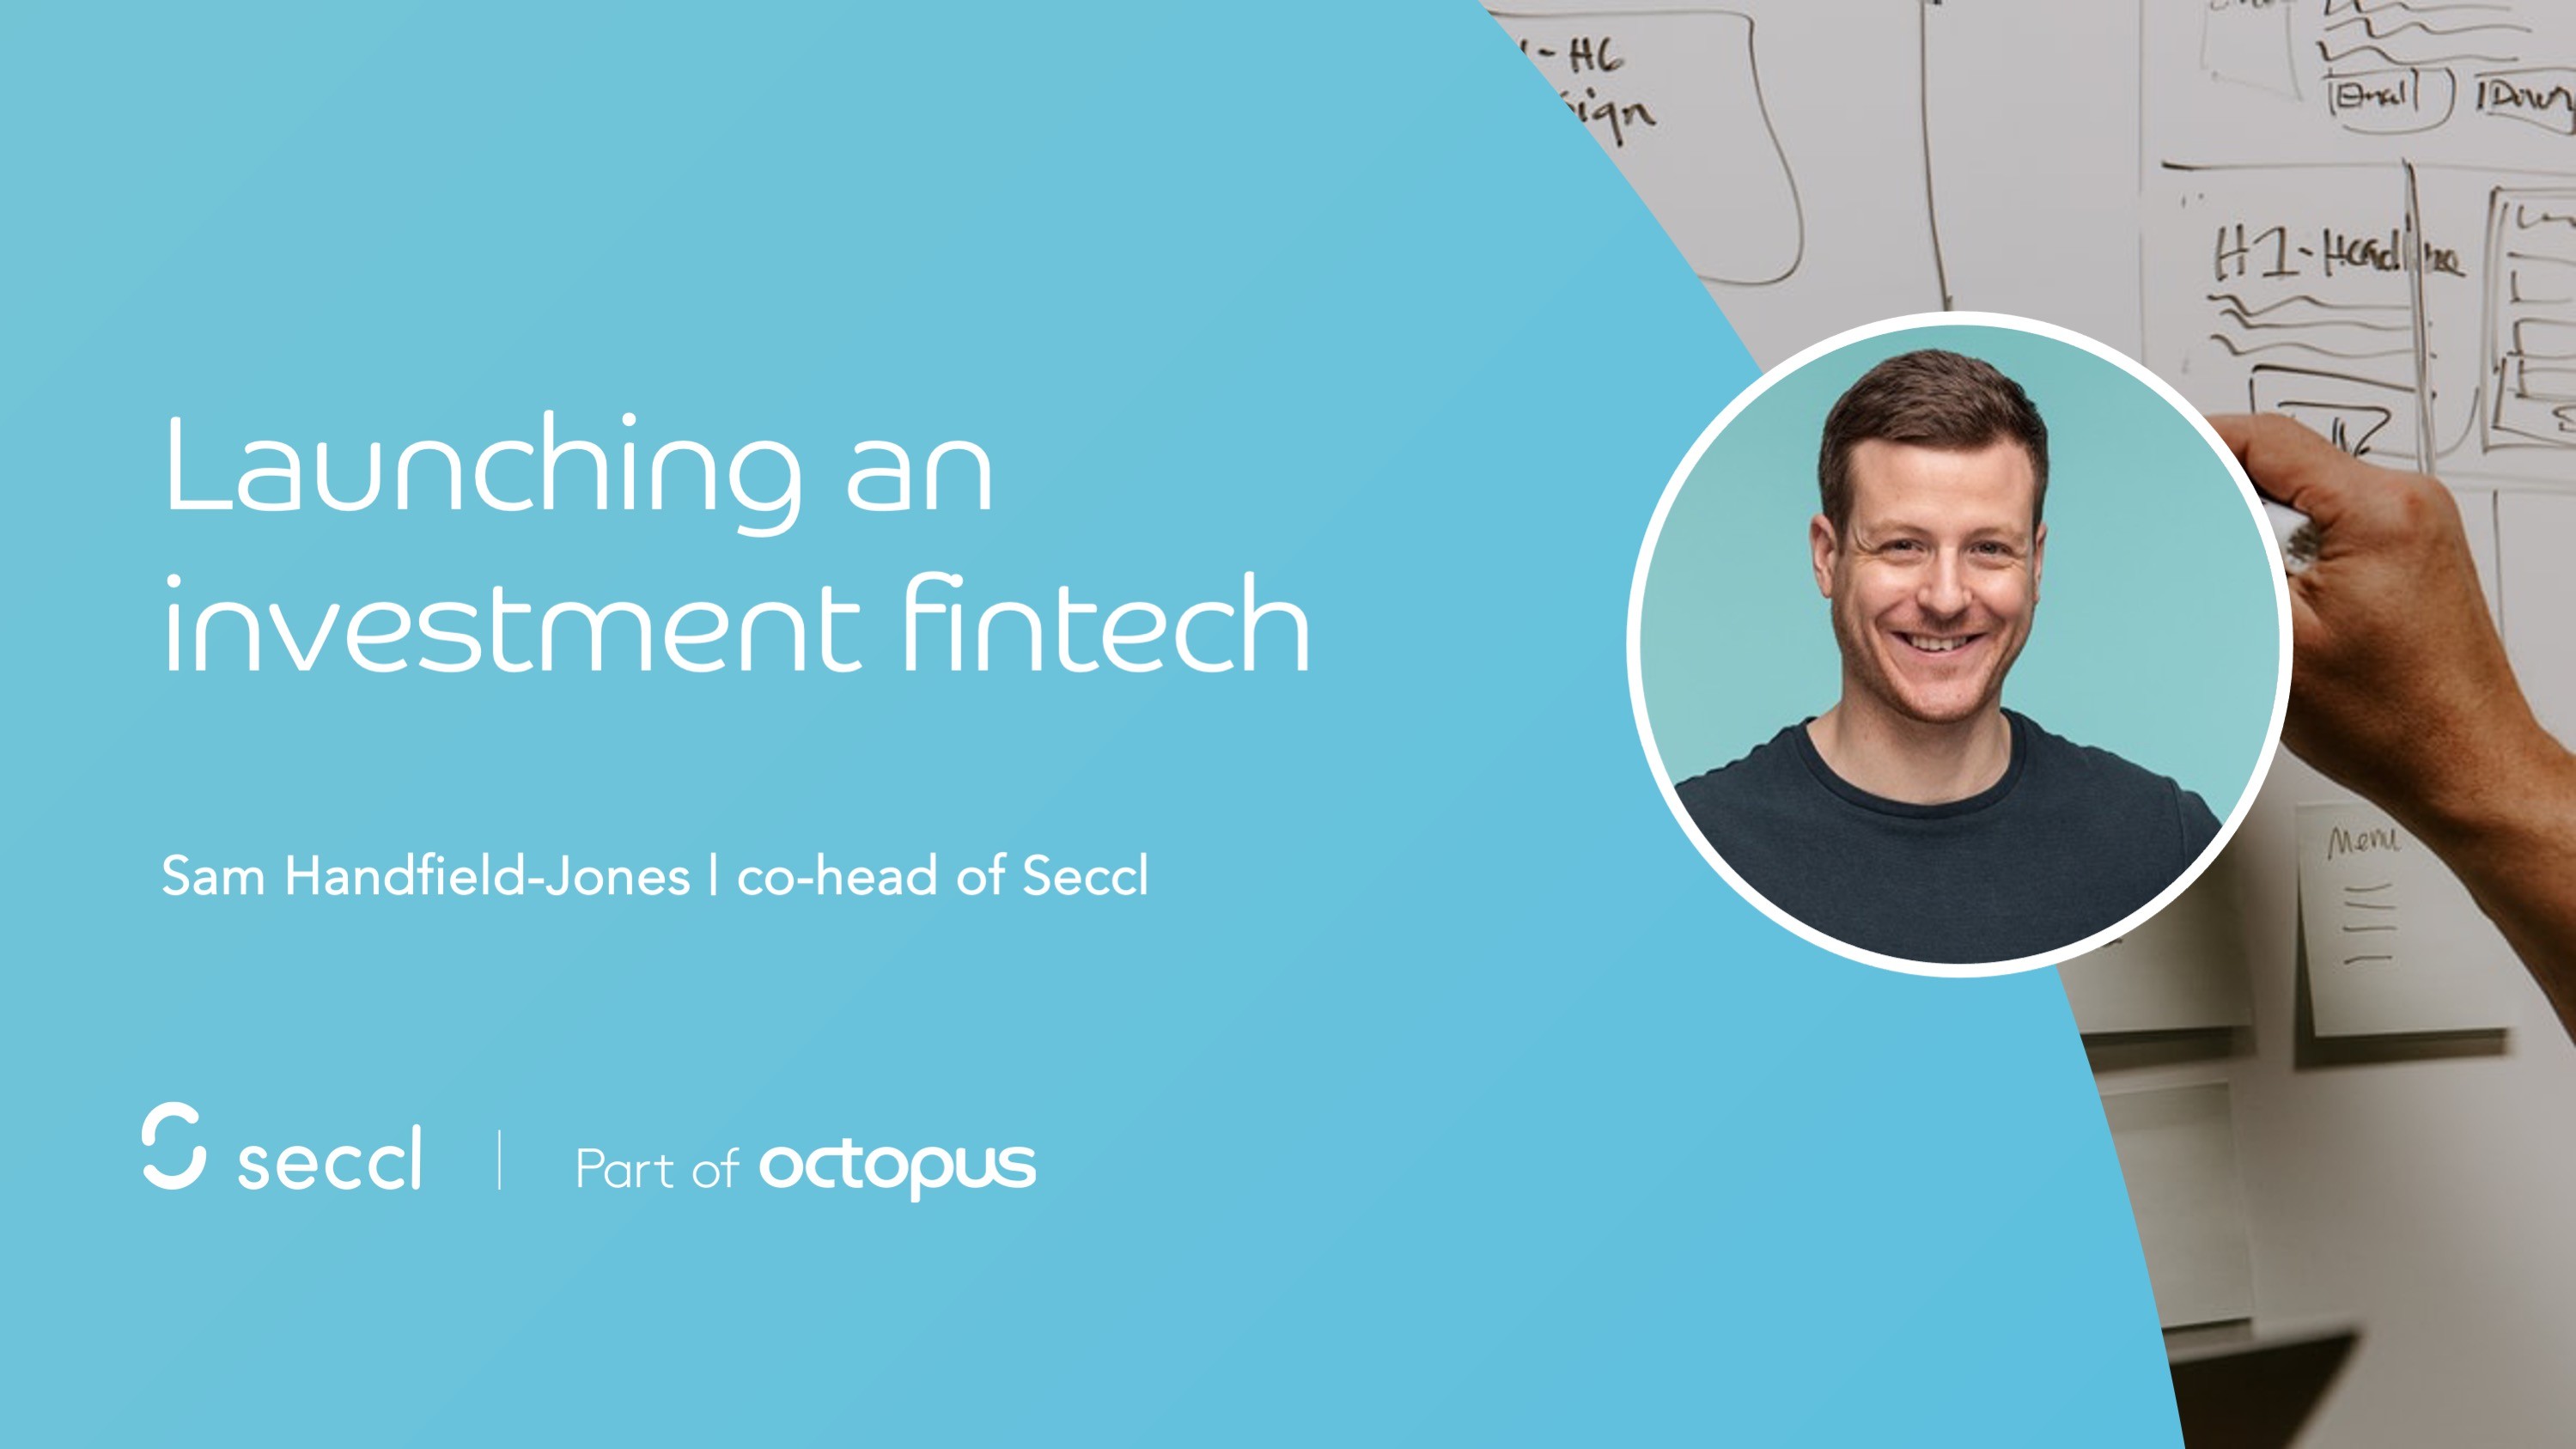 Launching an investment fintech: from idea to reality